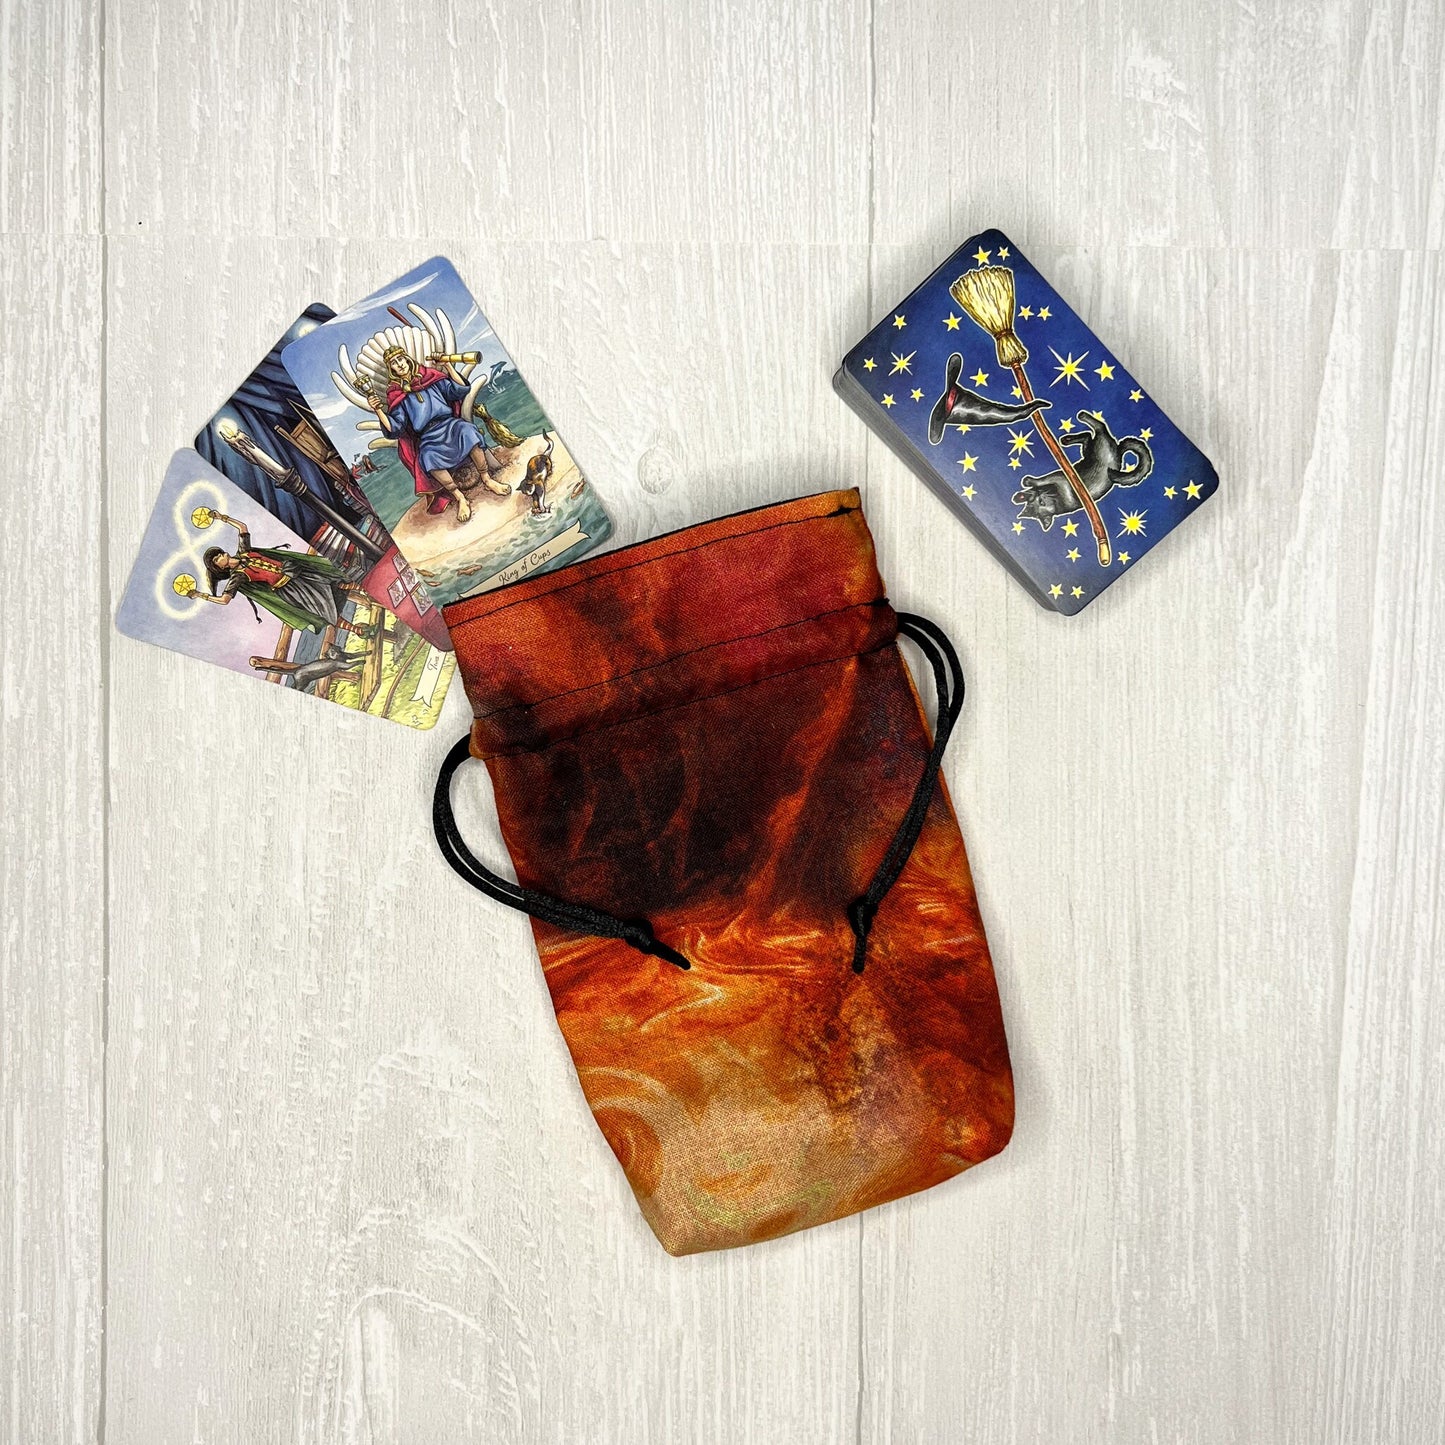 Mini Orange Fiery Tarot Deck Bag, Drawstring Pouch, Pocket Tarot, Dice Rune Crystal Bag, Witchcraft & Wiccan Supplies Gift, Divination Tools